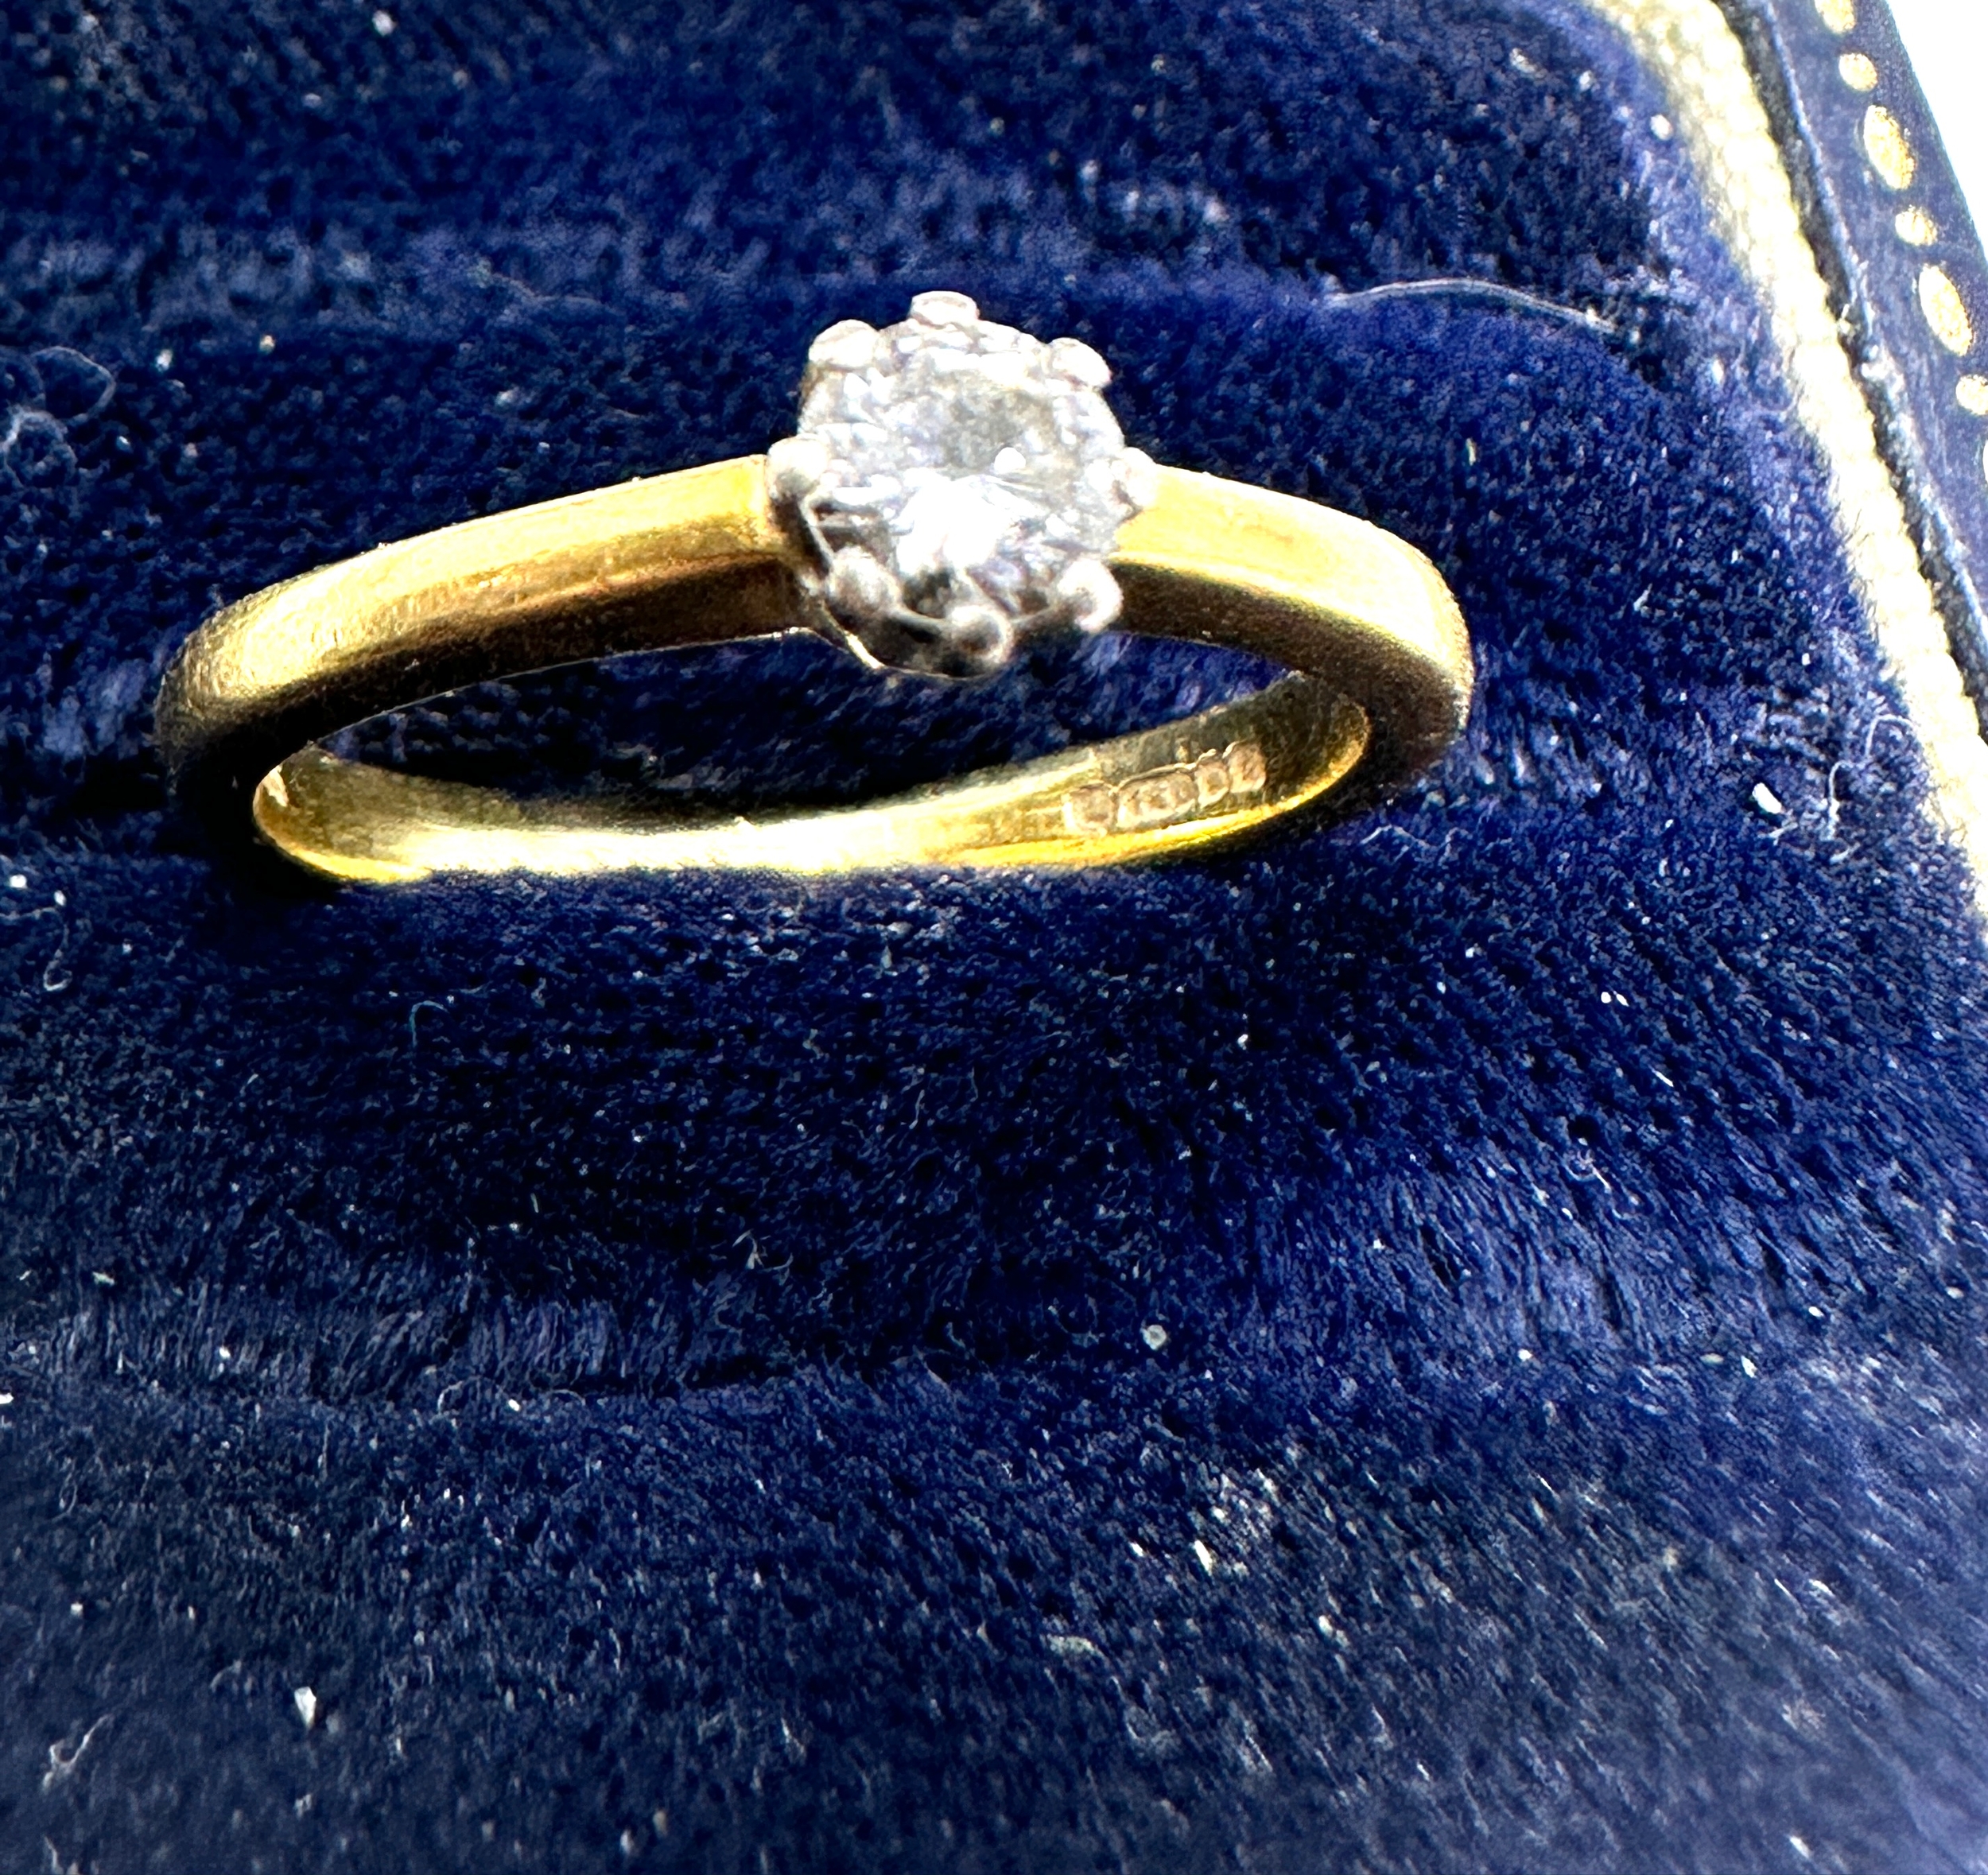 18ct gold solitaire diamond ring diamond measures approx 4mm weight 2.8g